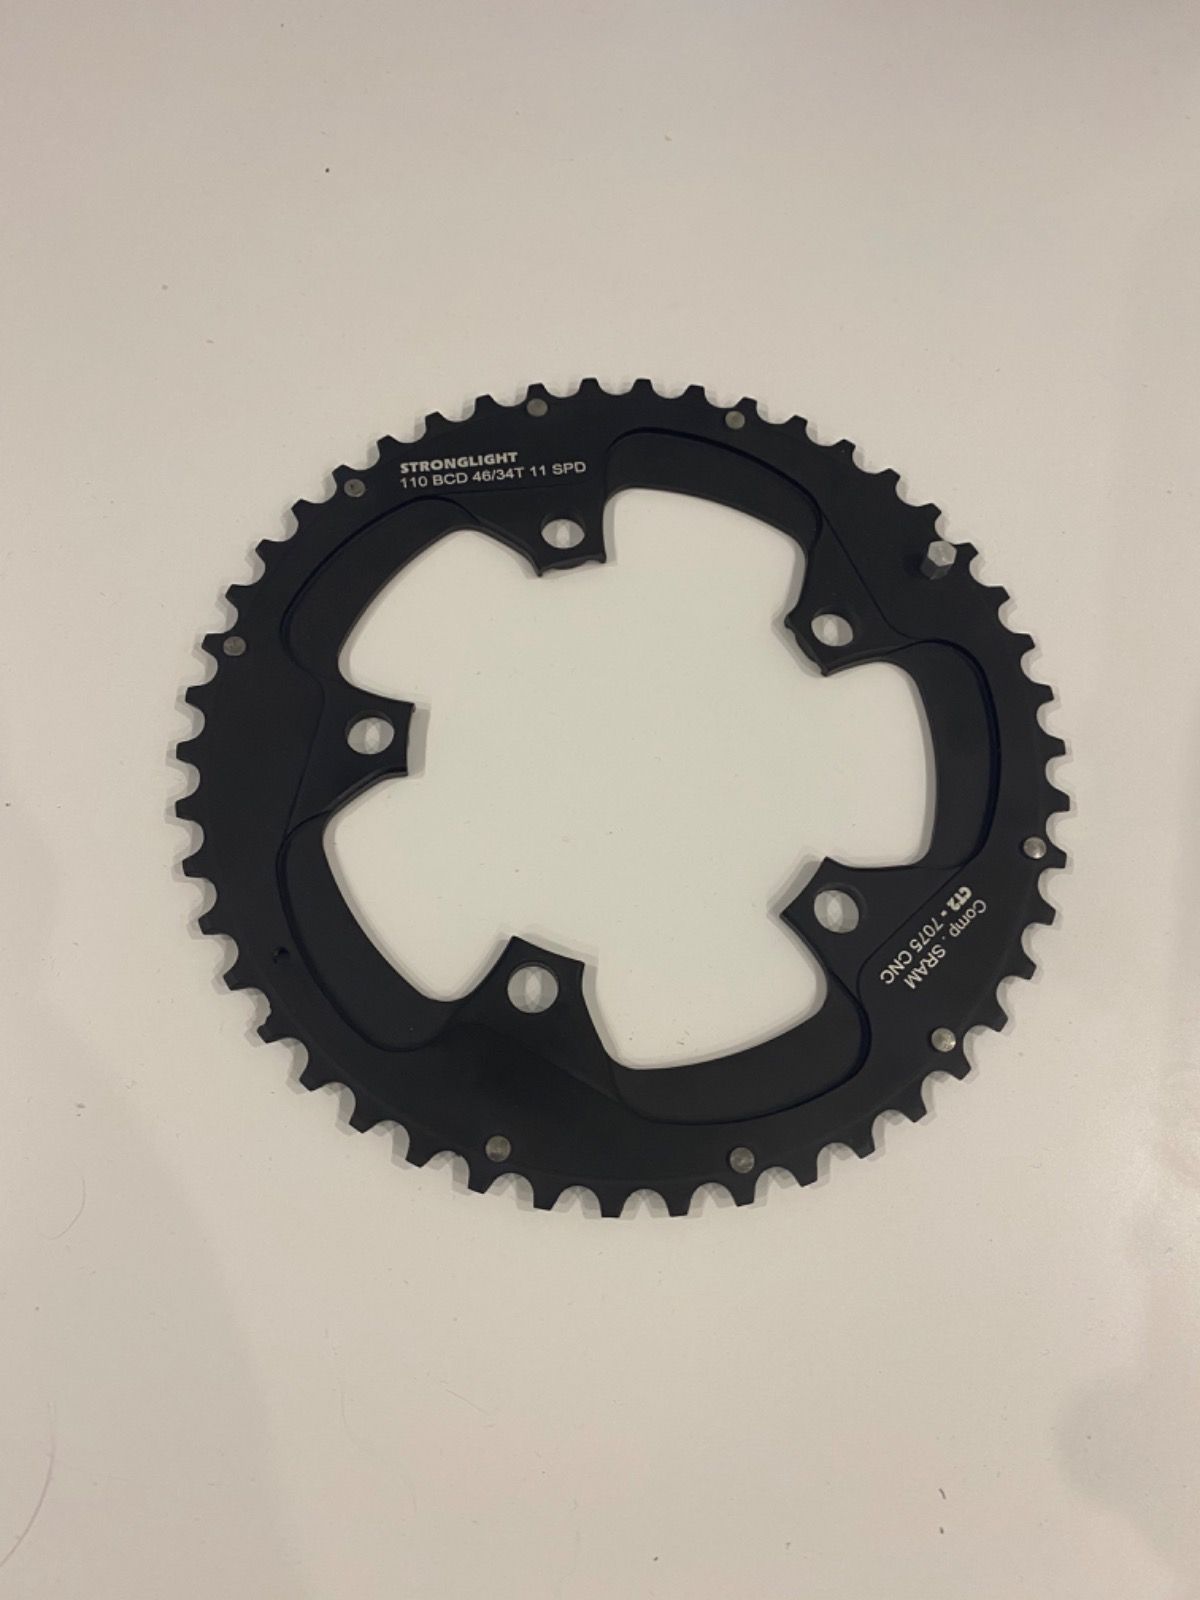 Stronglight SRAM red 22, 46T, 11-sp, 110bcd